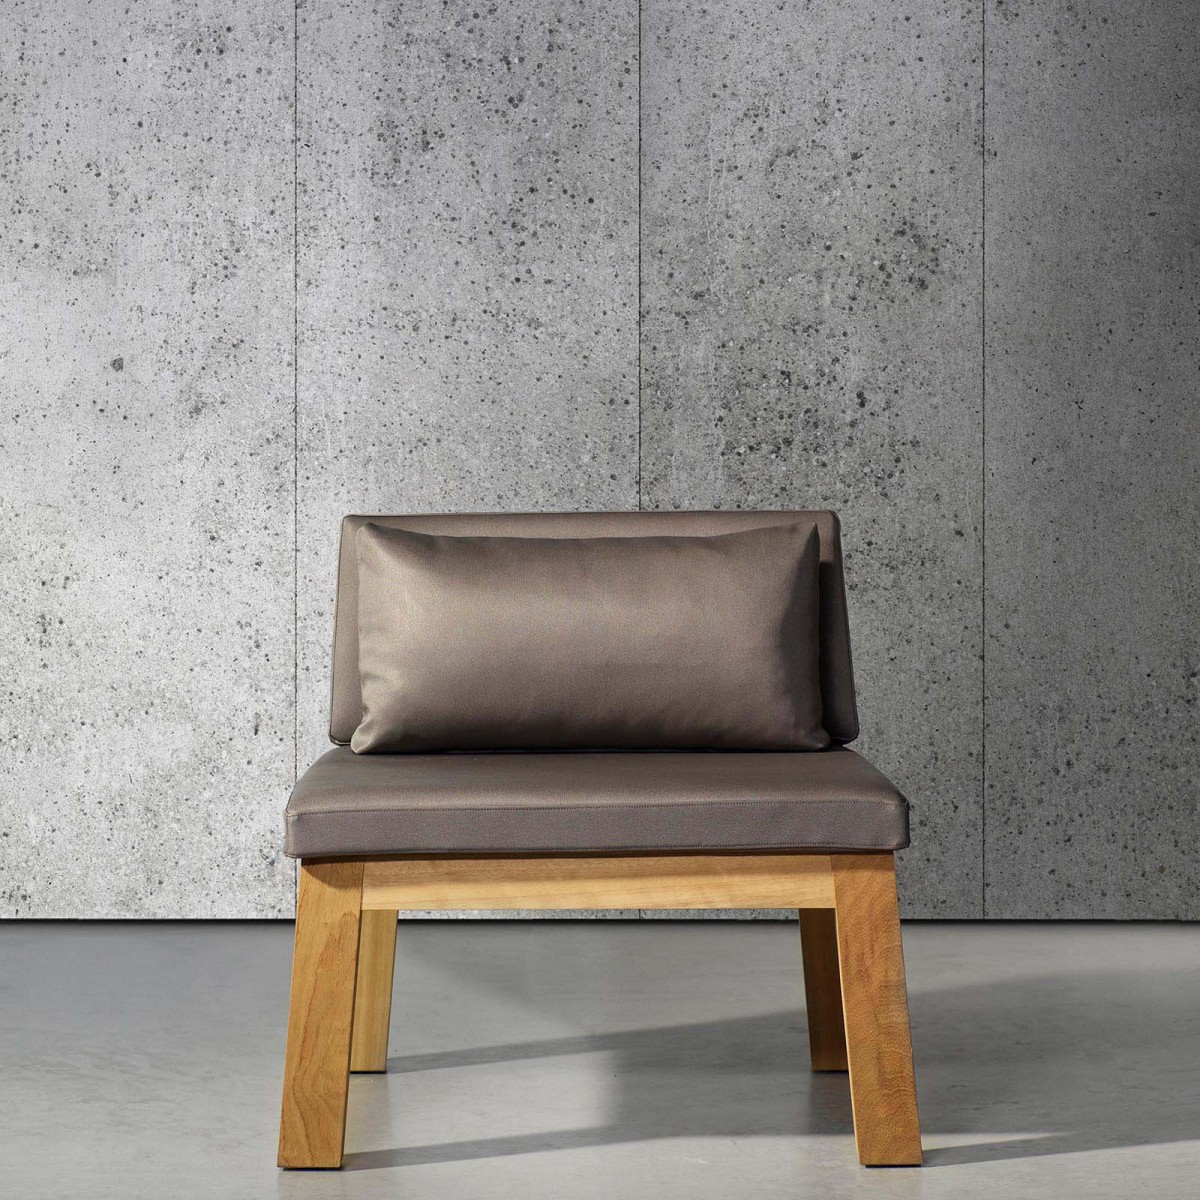 Tapet designer Concrete, Weathered Moss by Piet Boon, NLXL, 4.4mp / rola, Tapet Exclusivist 